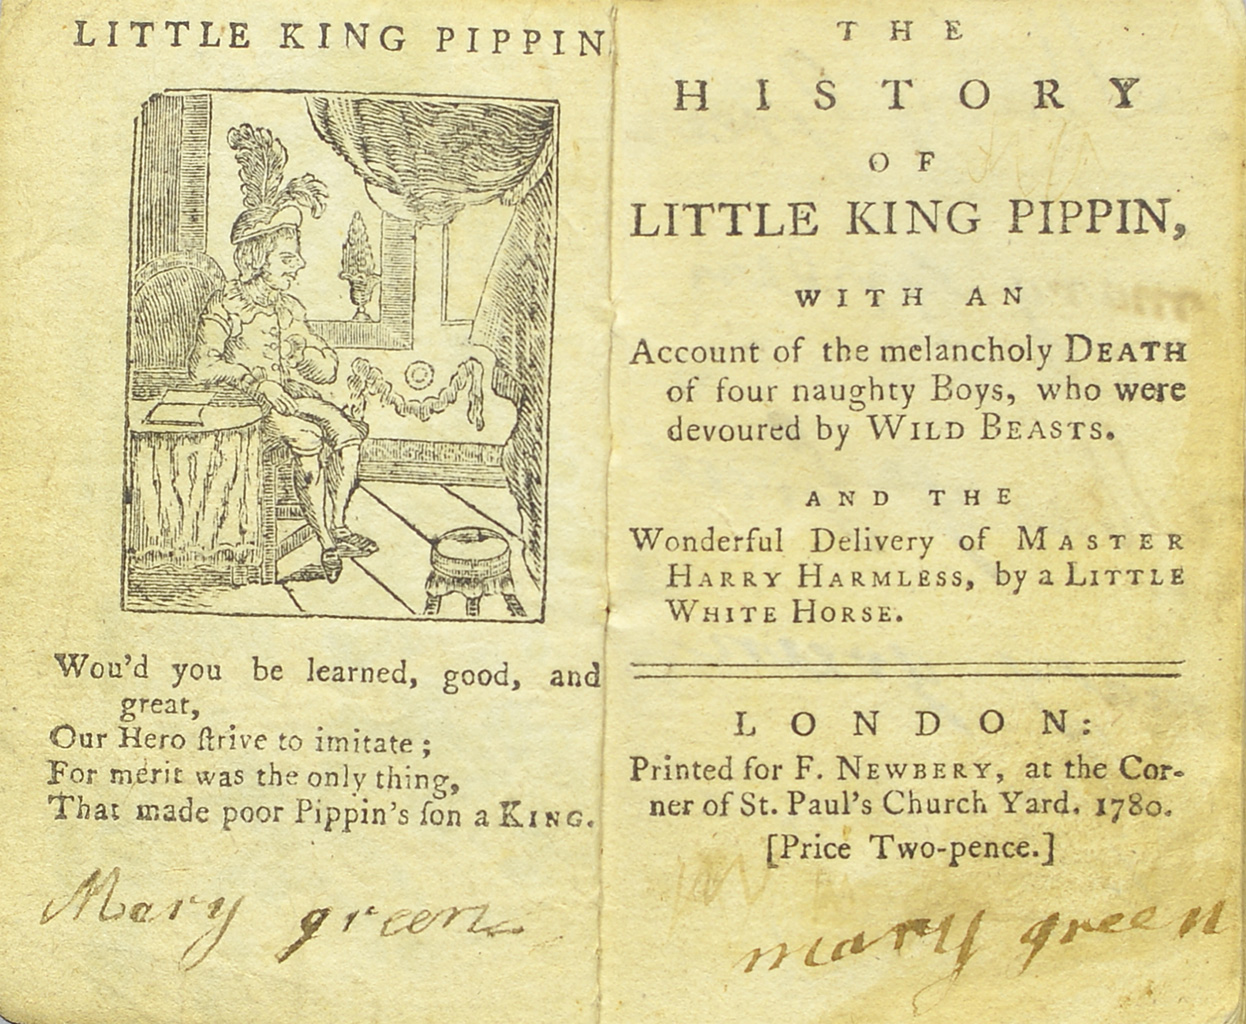 Exhibit Materials of The history of little king Pippin